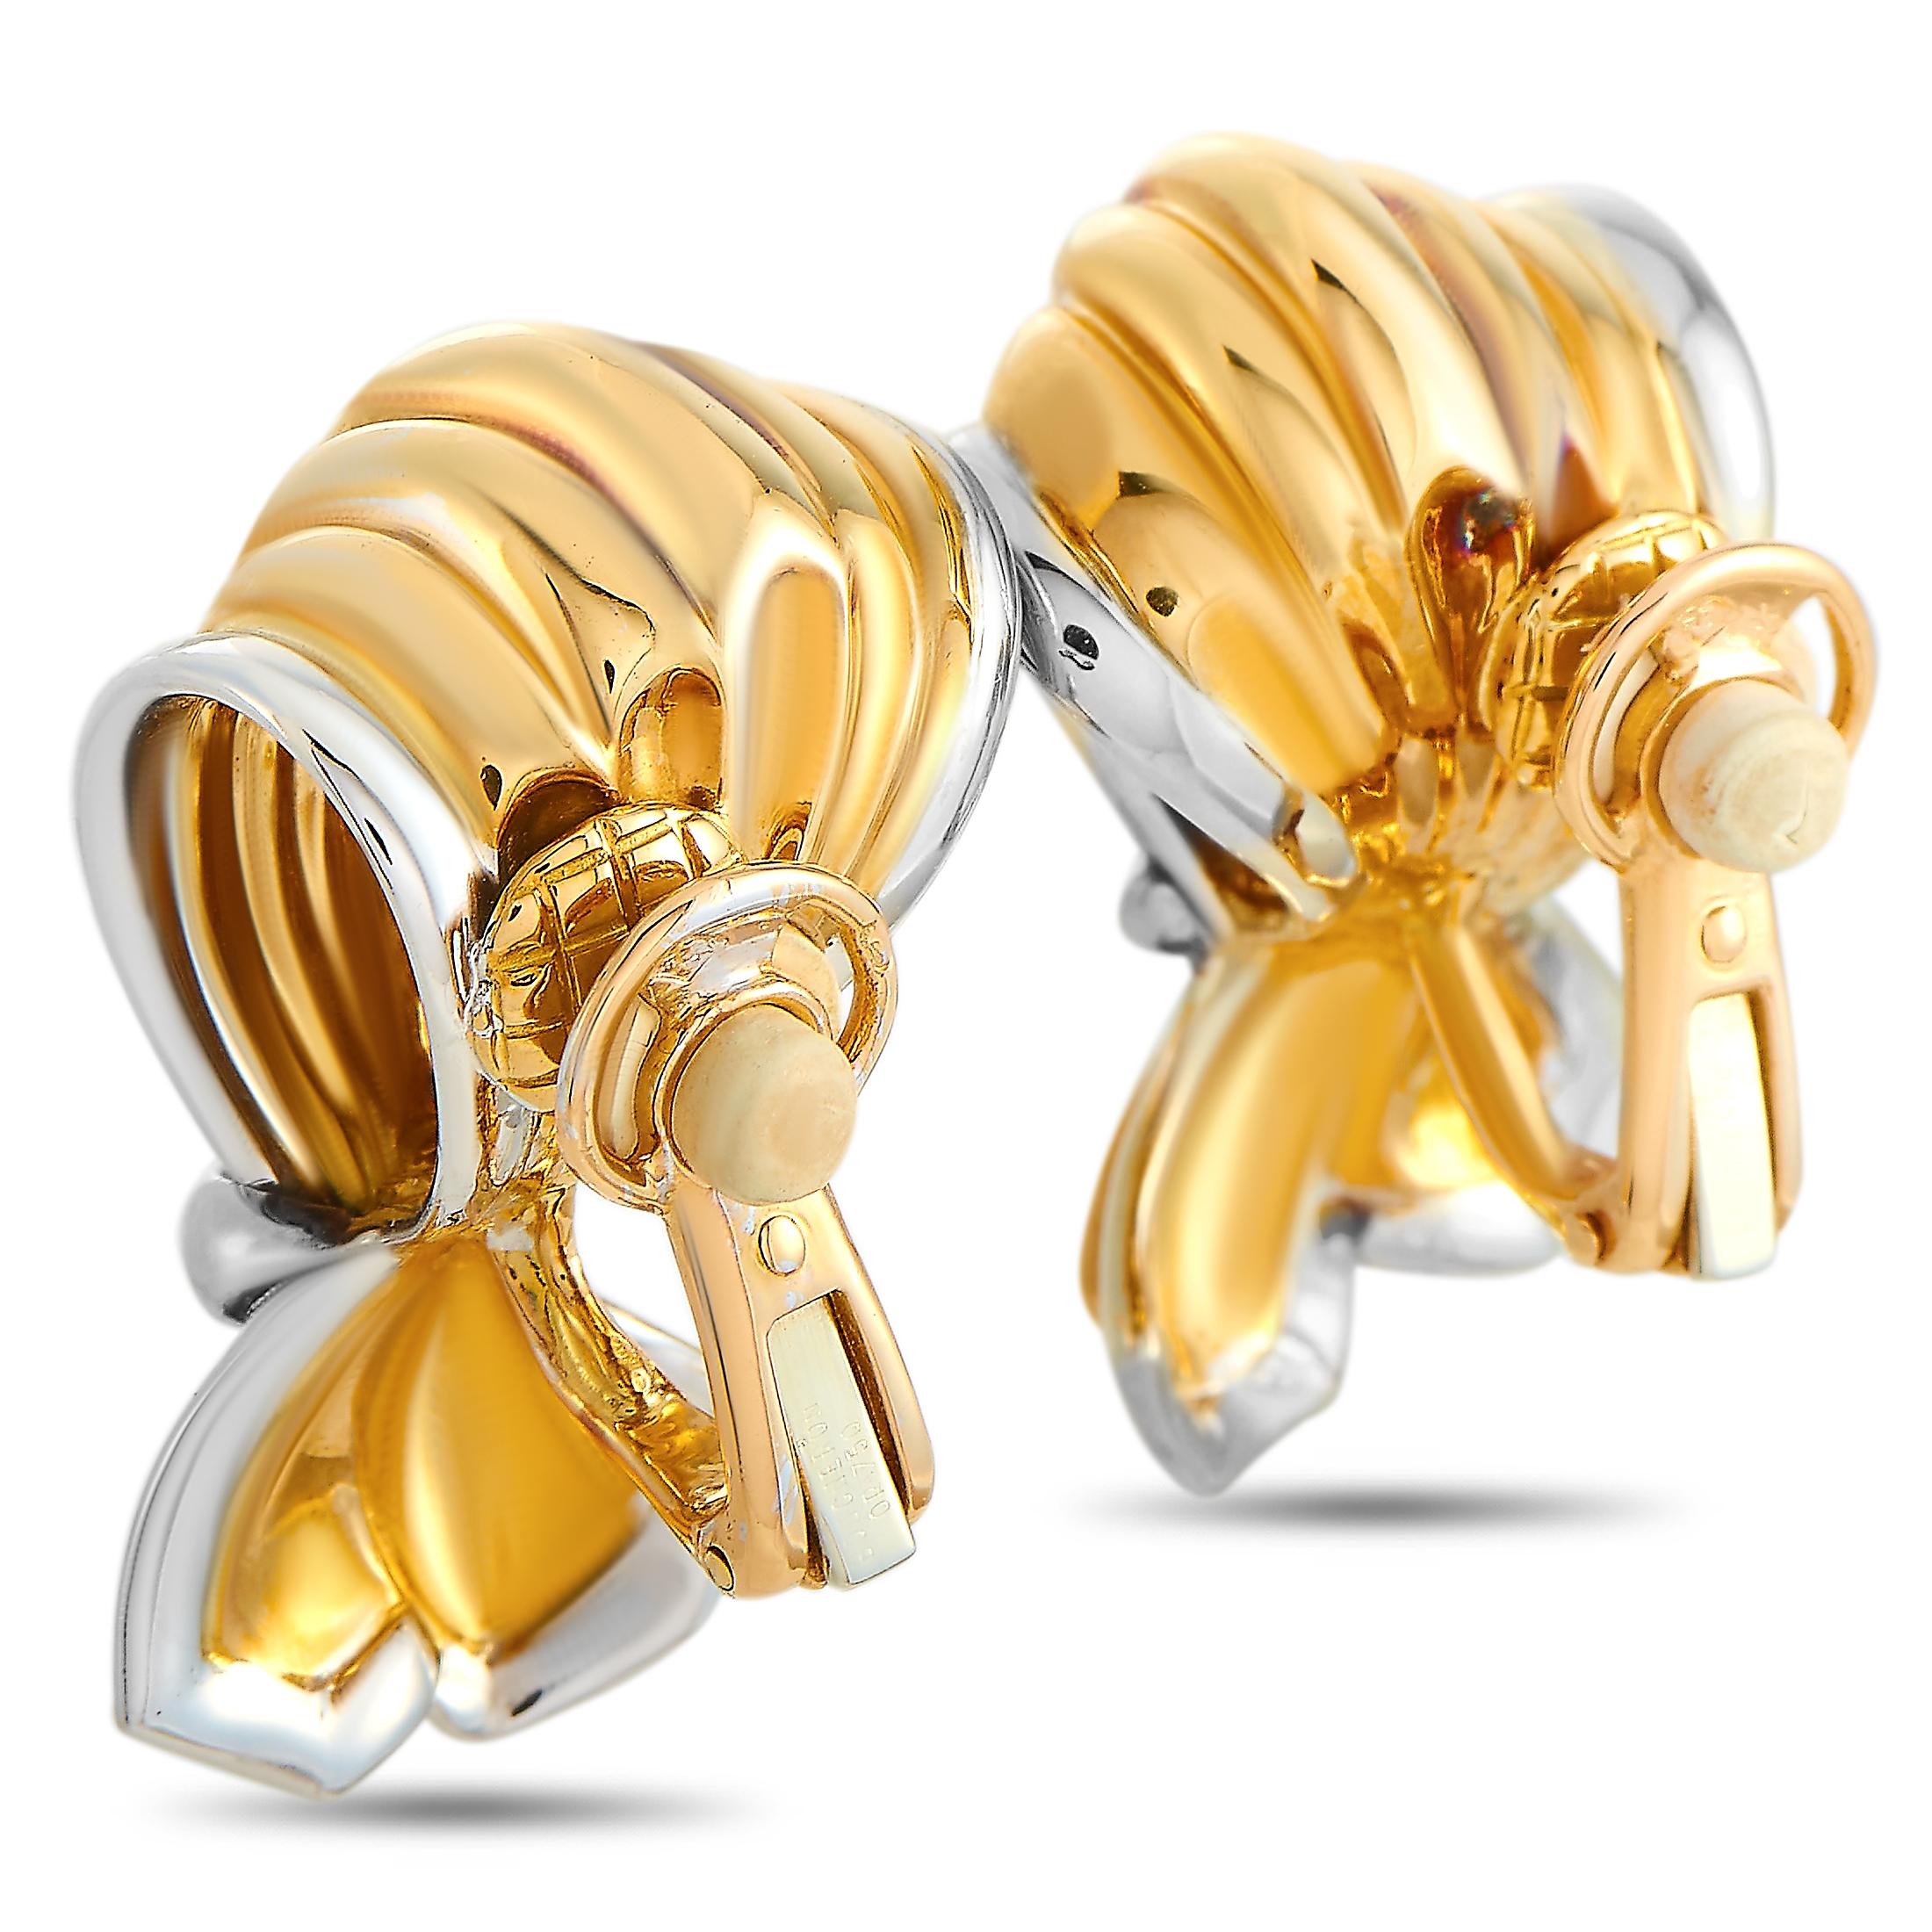 These Boucheron earrings are made out of 18K yellow and white gold and each weighs 15.75 grams. The earrings measure 1.15” in length and 0.75” in width.
 
 The pair is offered in estate condition and includes the manufacturer’s box.